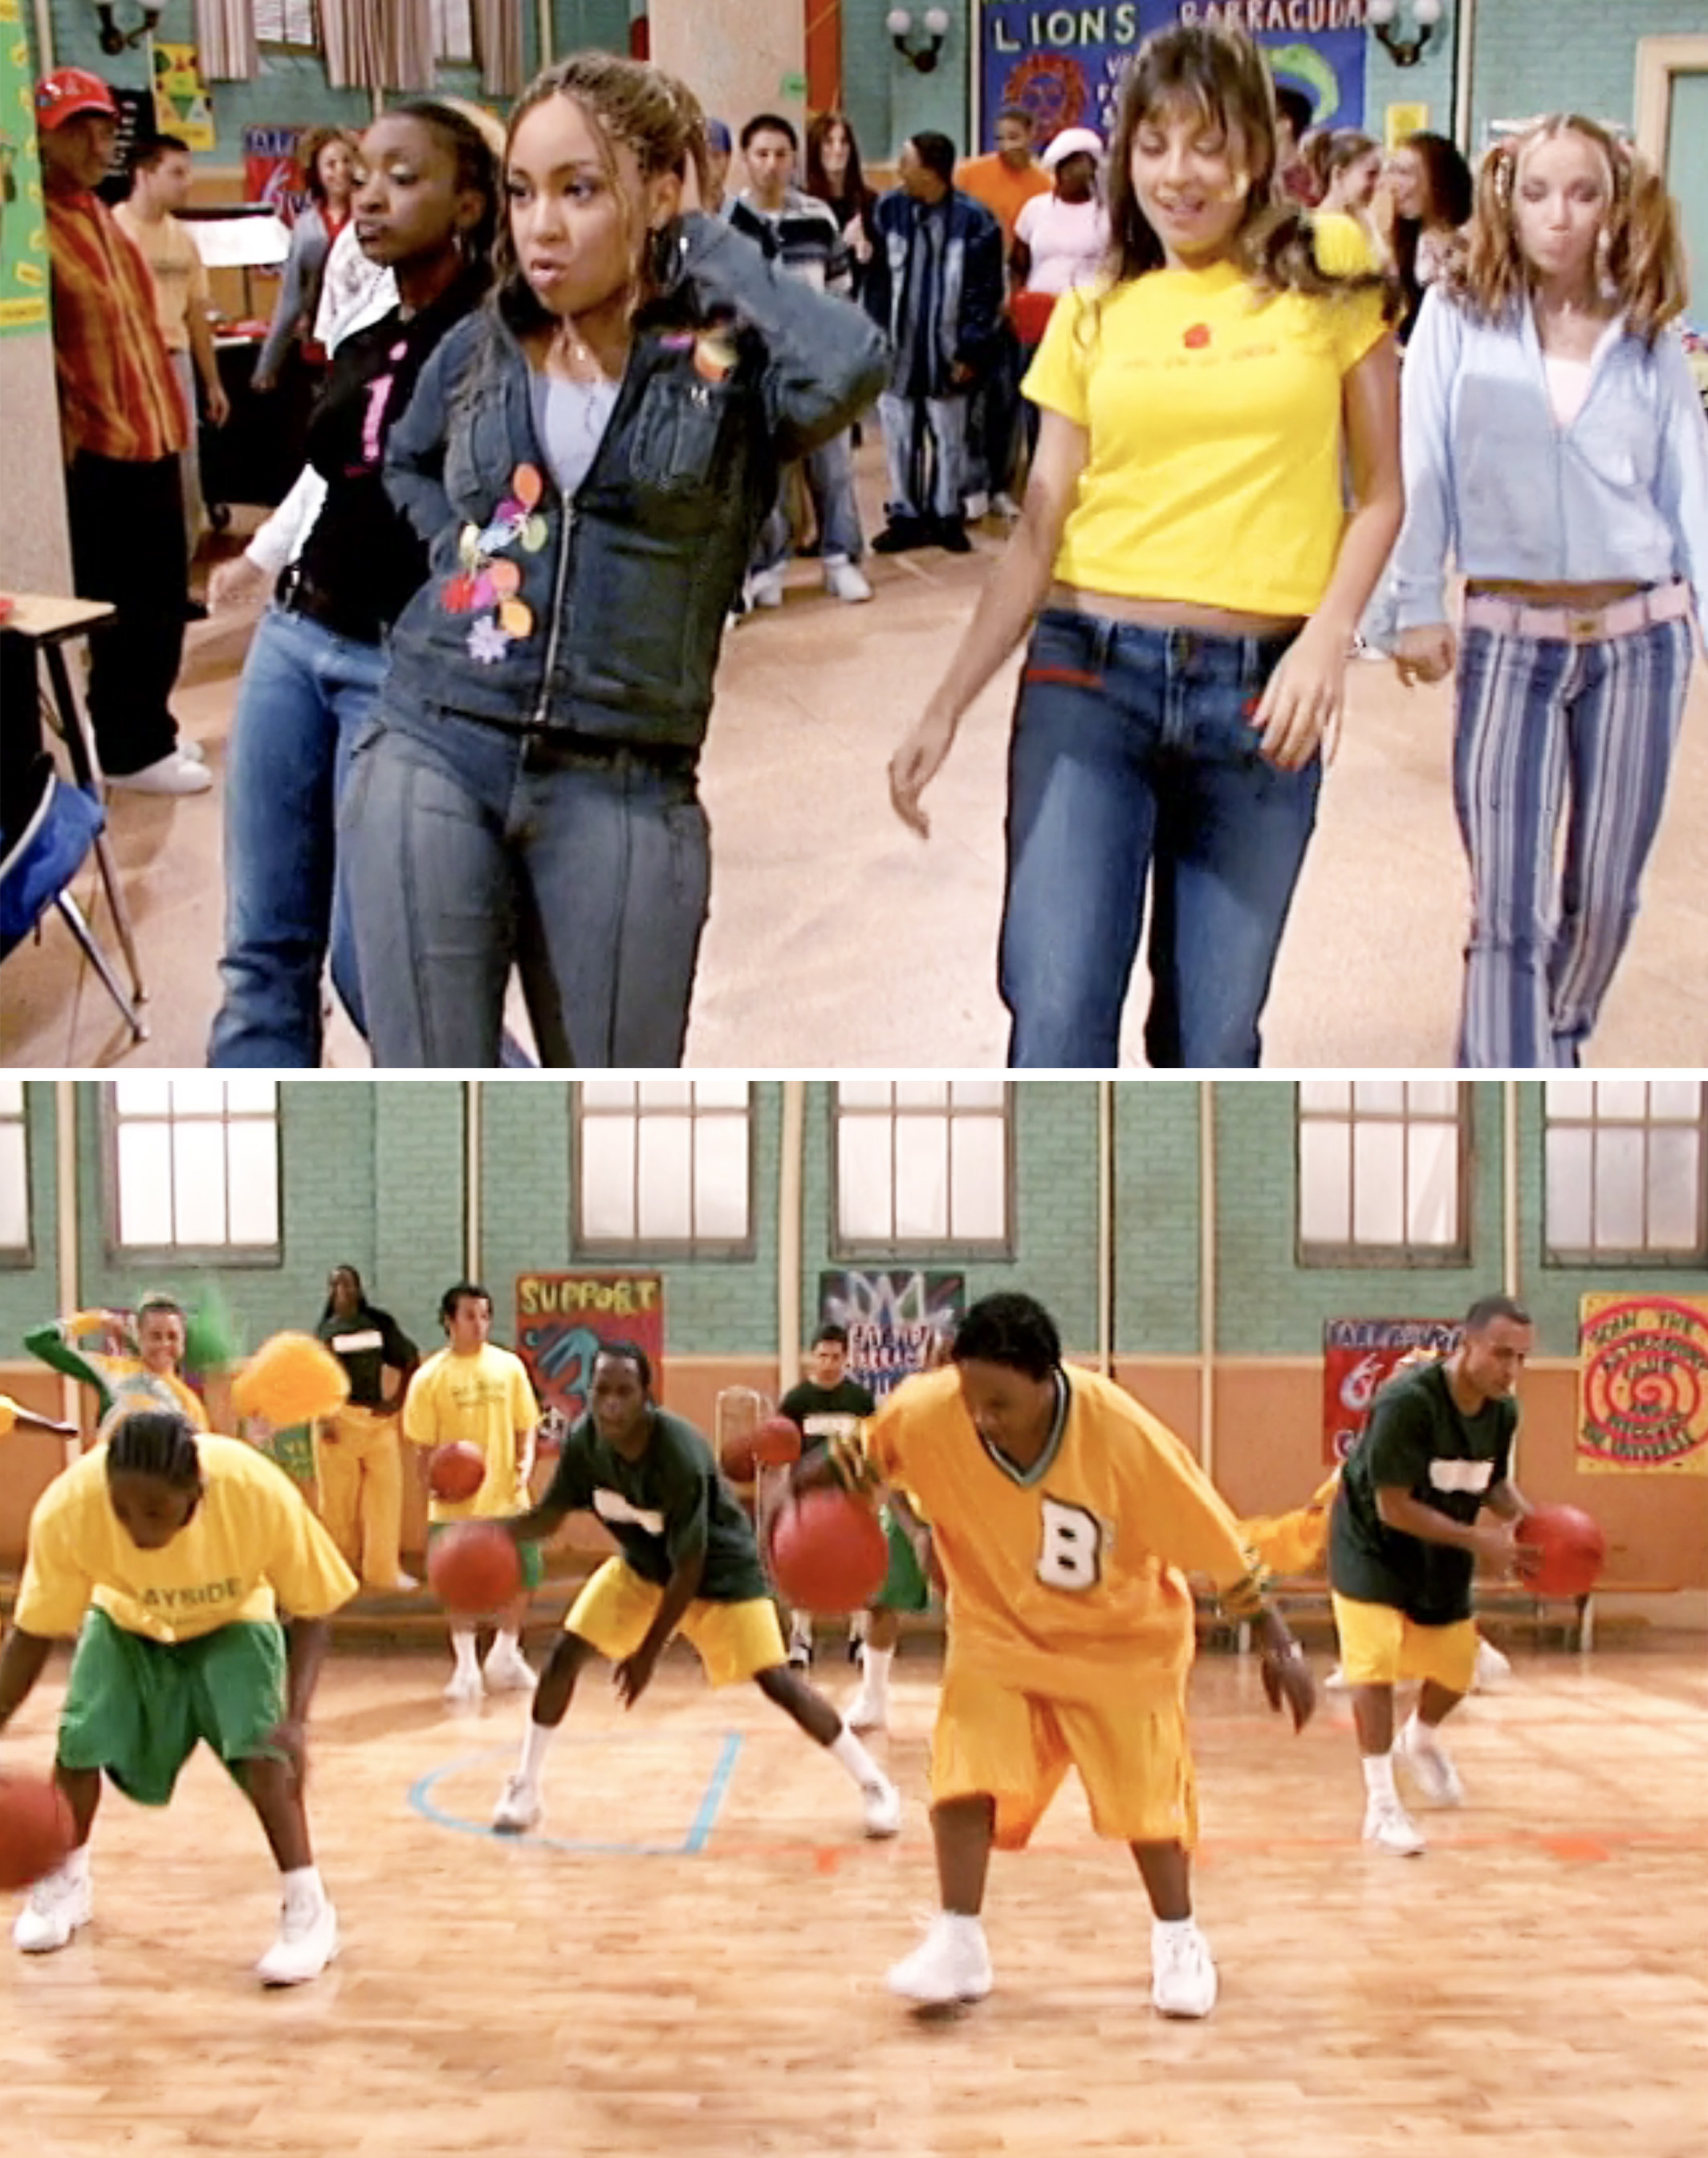 raven and her girlfriends strutting in the halls, and cory in the gym dancing with basketballs